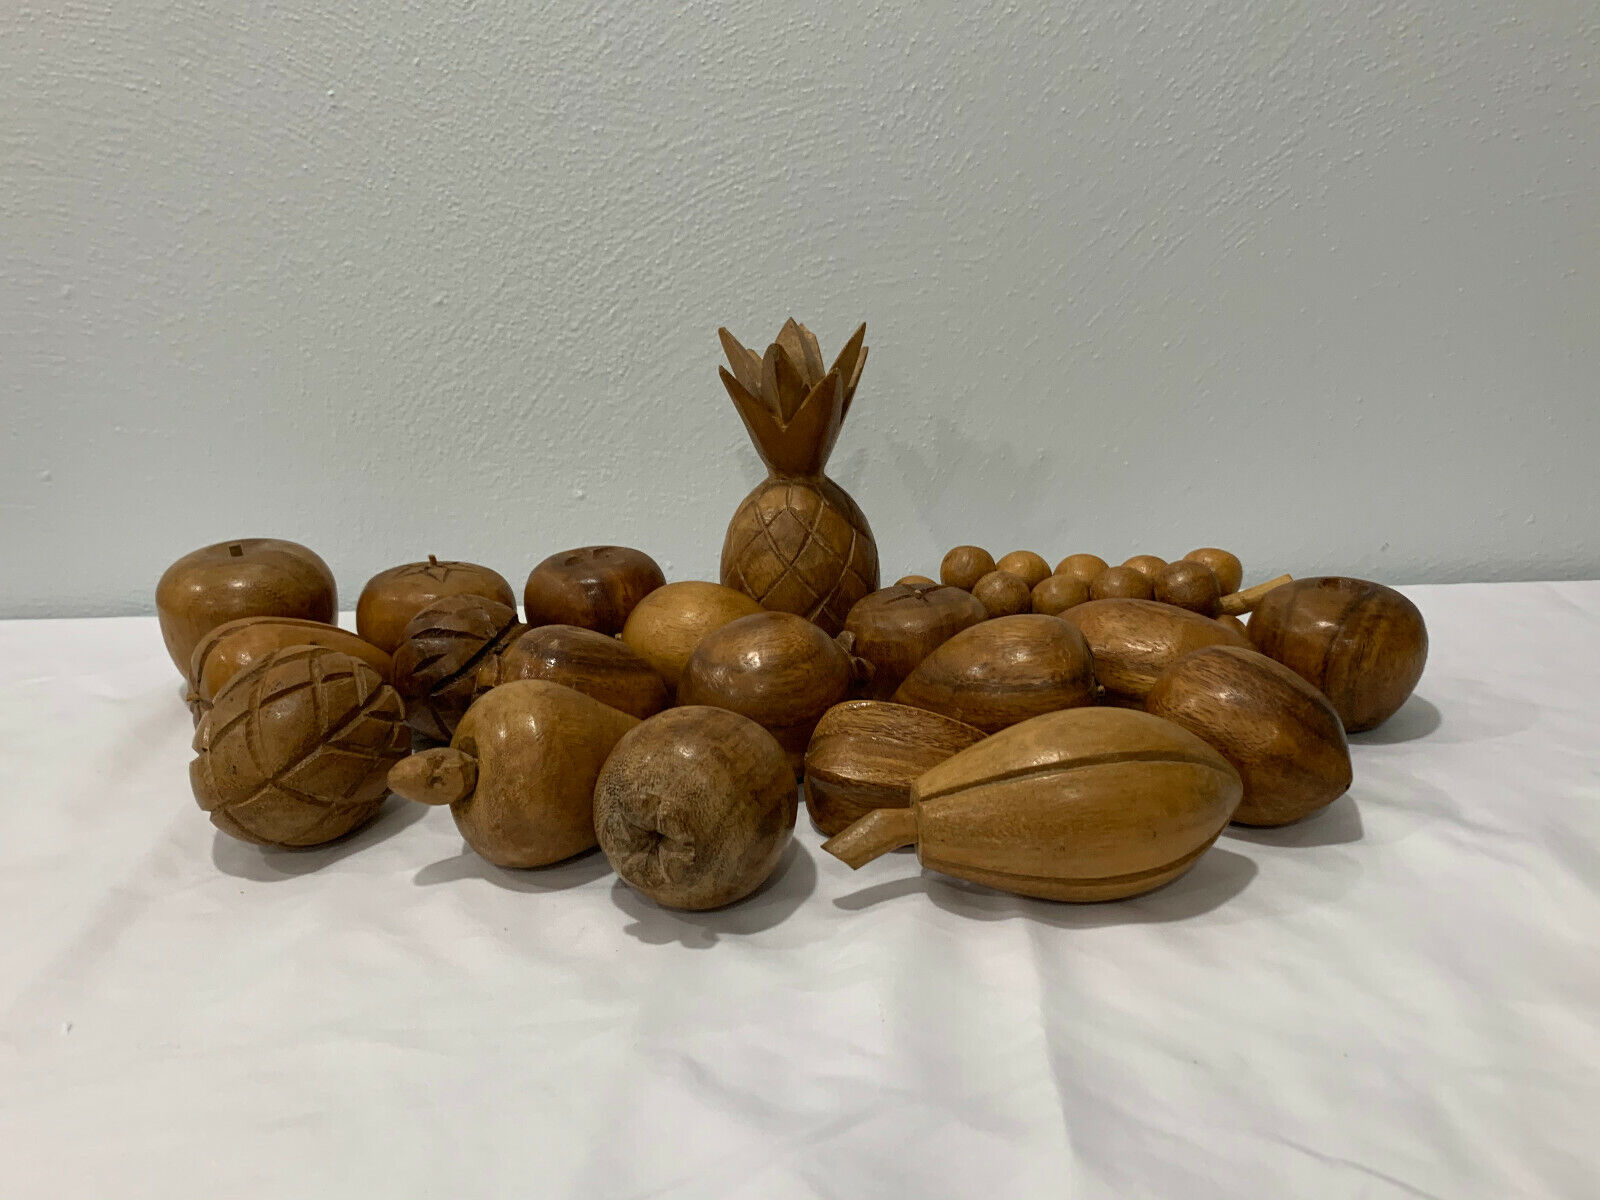 Vintage Possibly Asian Lot of 20 Pieces of Carved Wood Fruit